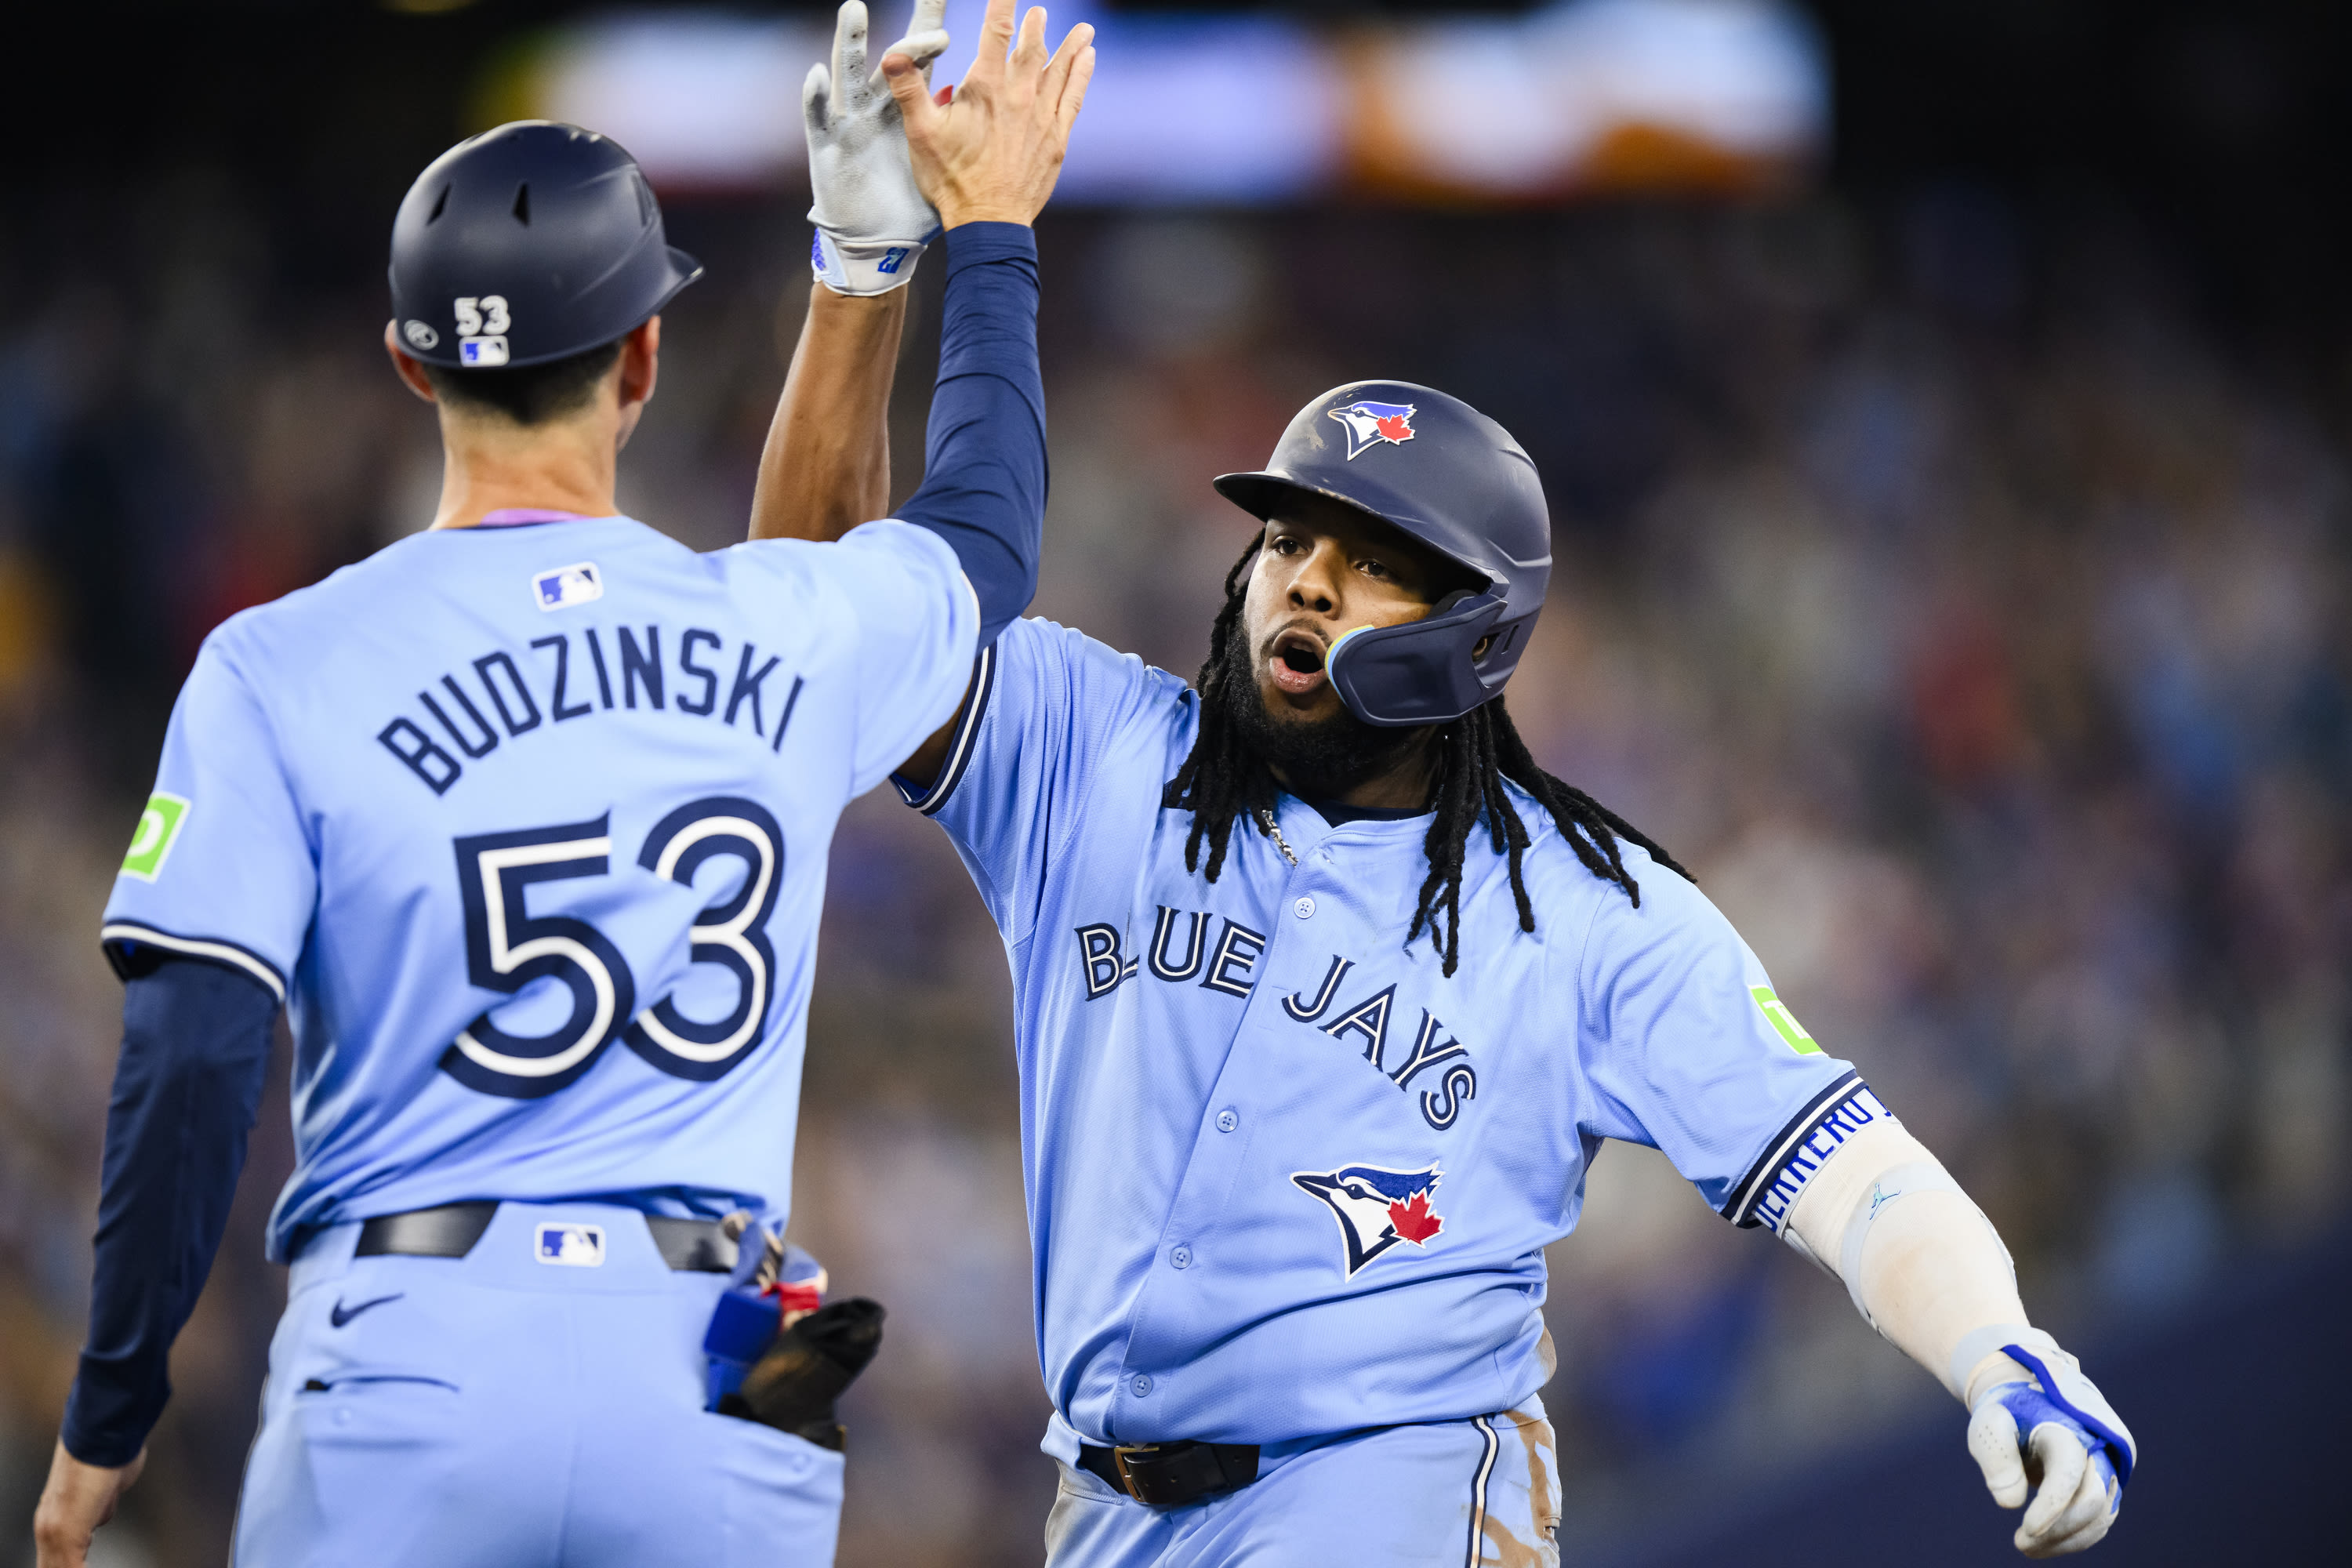 Clement gets winning hit as Blue Jays rally to beat red-hot Twins 10-8